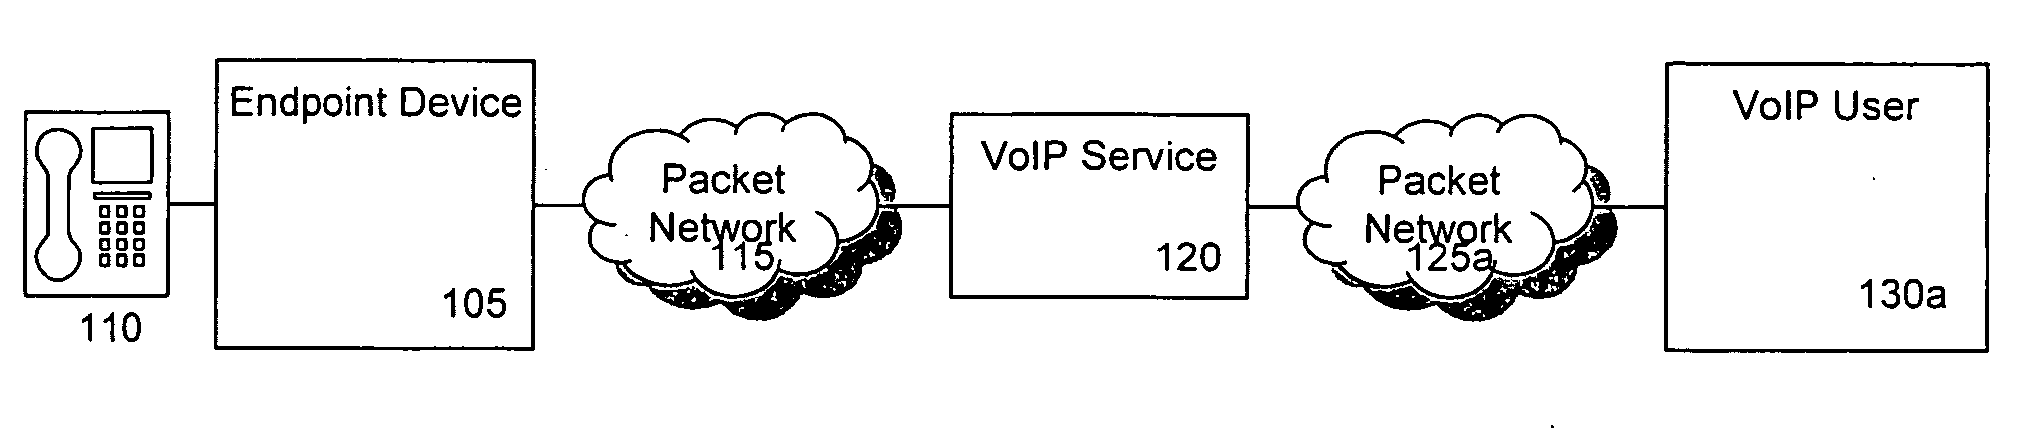 Method and apparatus for ensuring accessibility to emergency service via VoIP or via PSTN